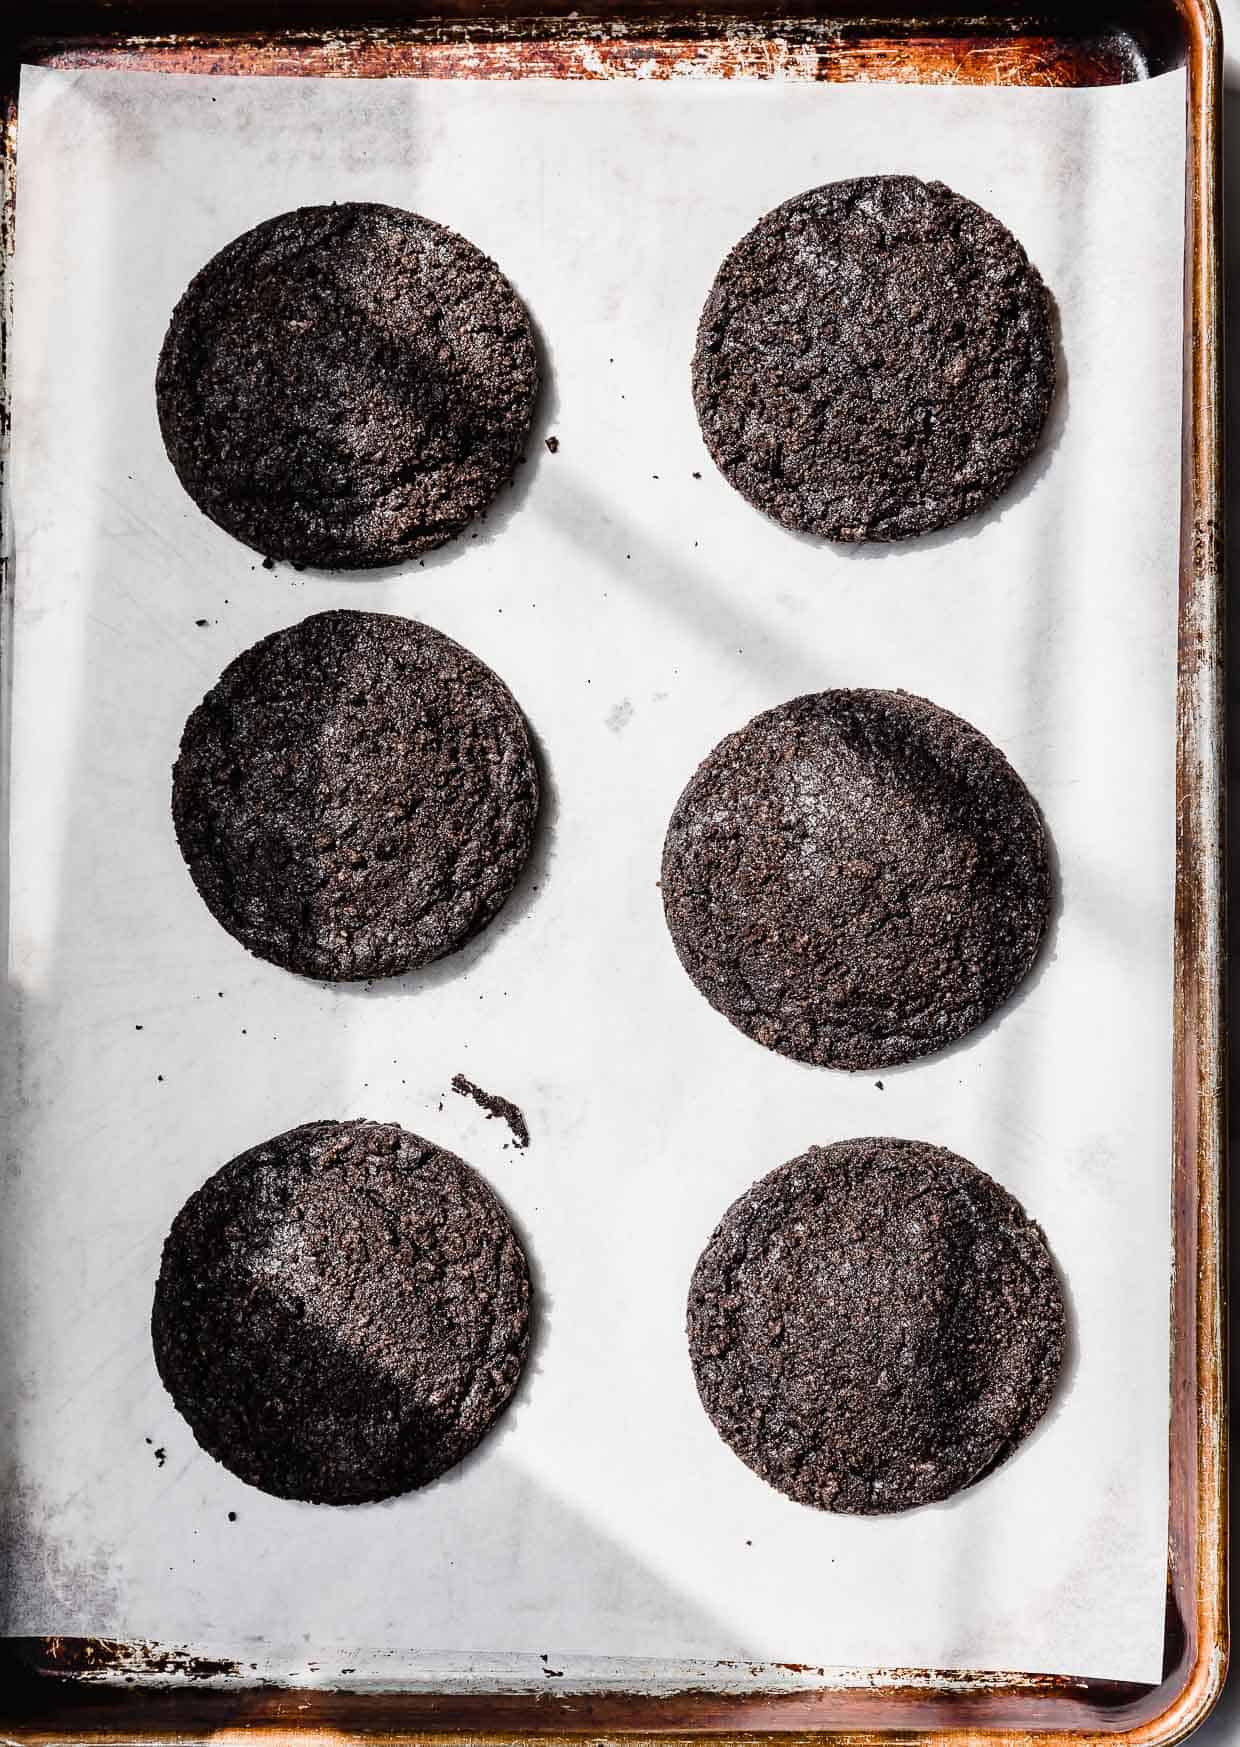 Six baked Dirt Cake Cookies on a parchment lined baking sheet.